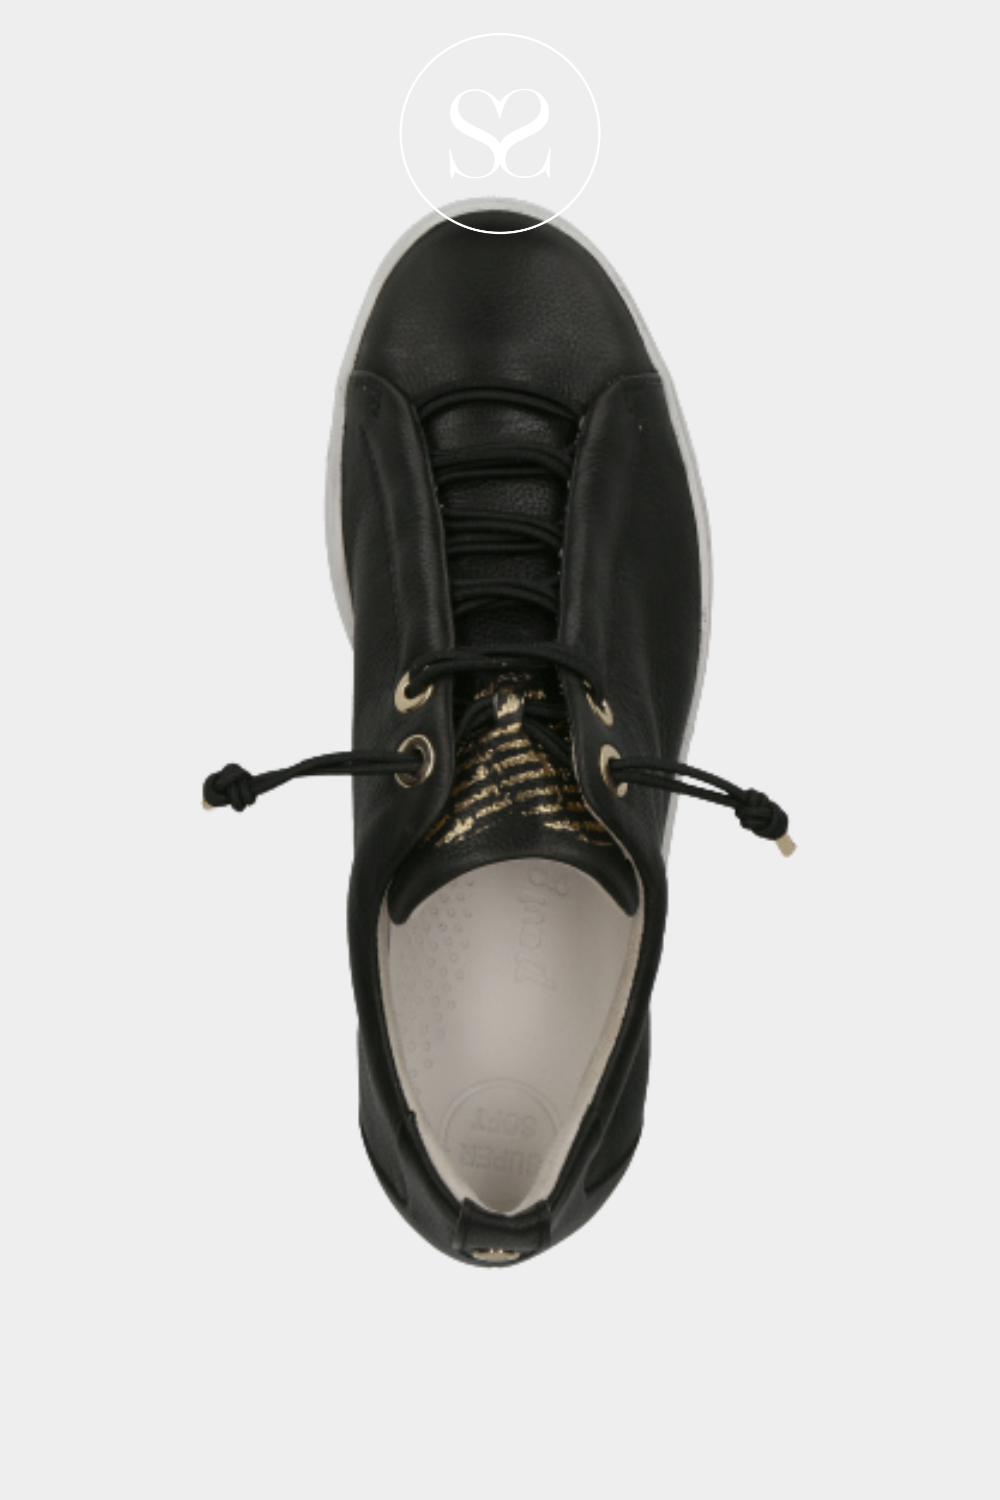 BLACK LEATHER PULL ON TRAINER FROM PAUL GREEN. THIS STYLE HAS A PLATFORM SOLE AND SUBTLE GOLD DETAILING FOR A DRESSY TRAINER STYLE.